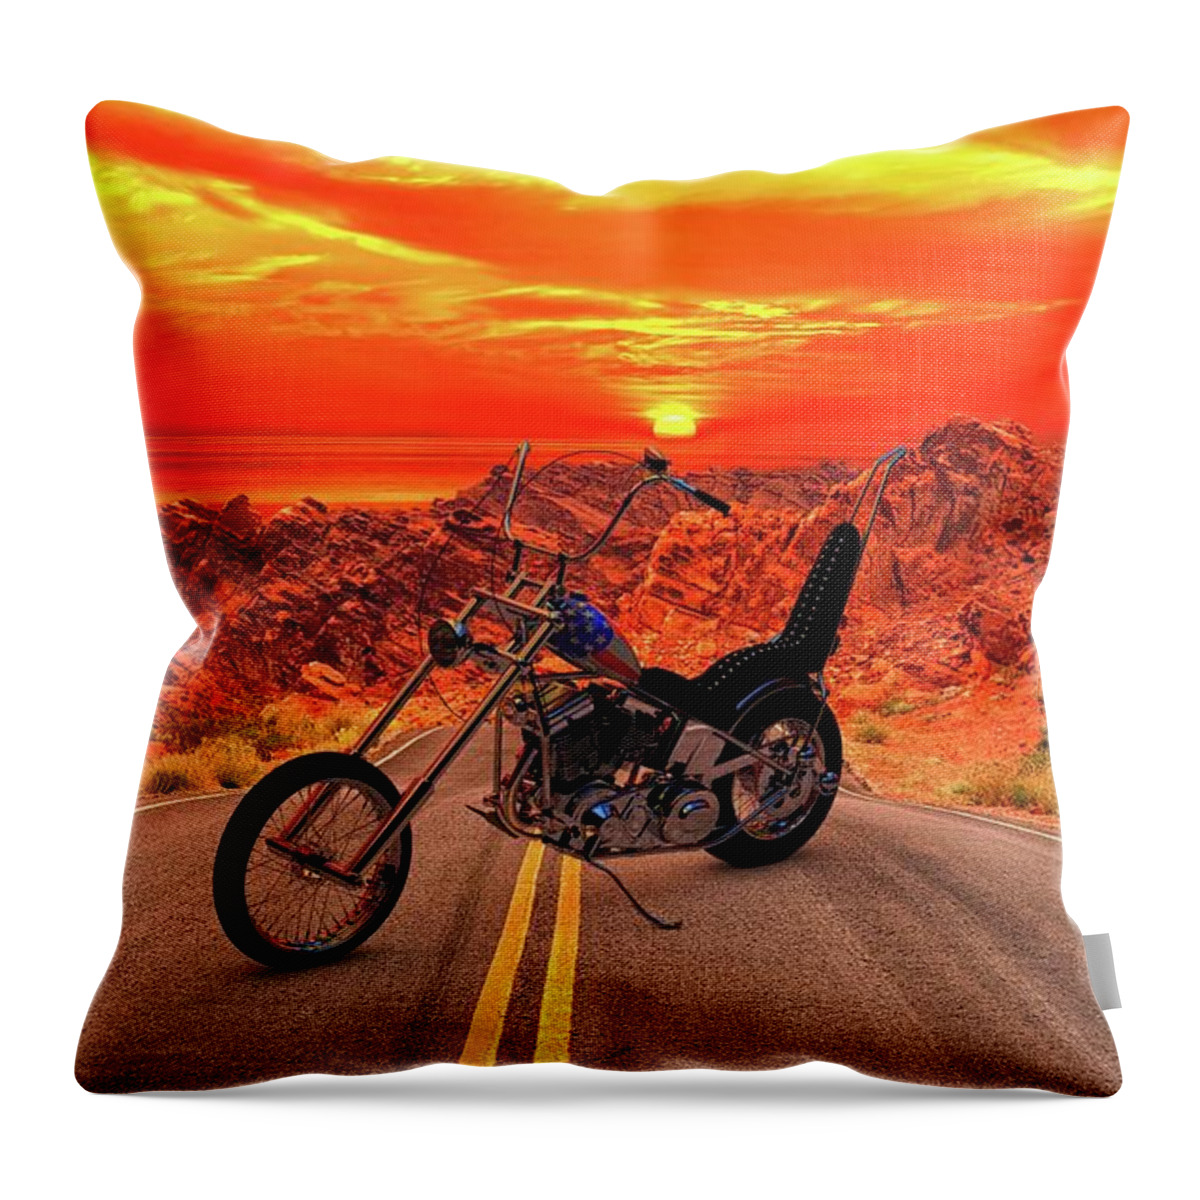 Easy Rider Chopper # Easy Rider # Chopper #sunset # Motorcycle #colorful #chopper # Render # Custom Chopper # Motorcycle Art # Usa # Reflections #florida #harley-davidson #american #c4d 3d Model #3d Rendering #photorealistic #custom Motorcycle #bobber #visualization # Easy Rider #chopper Throw Pillow featuring the photograph Easy rider chopper by Louis Ferreira